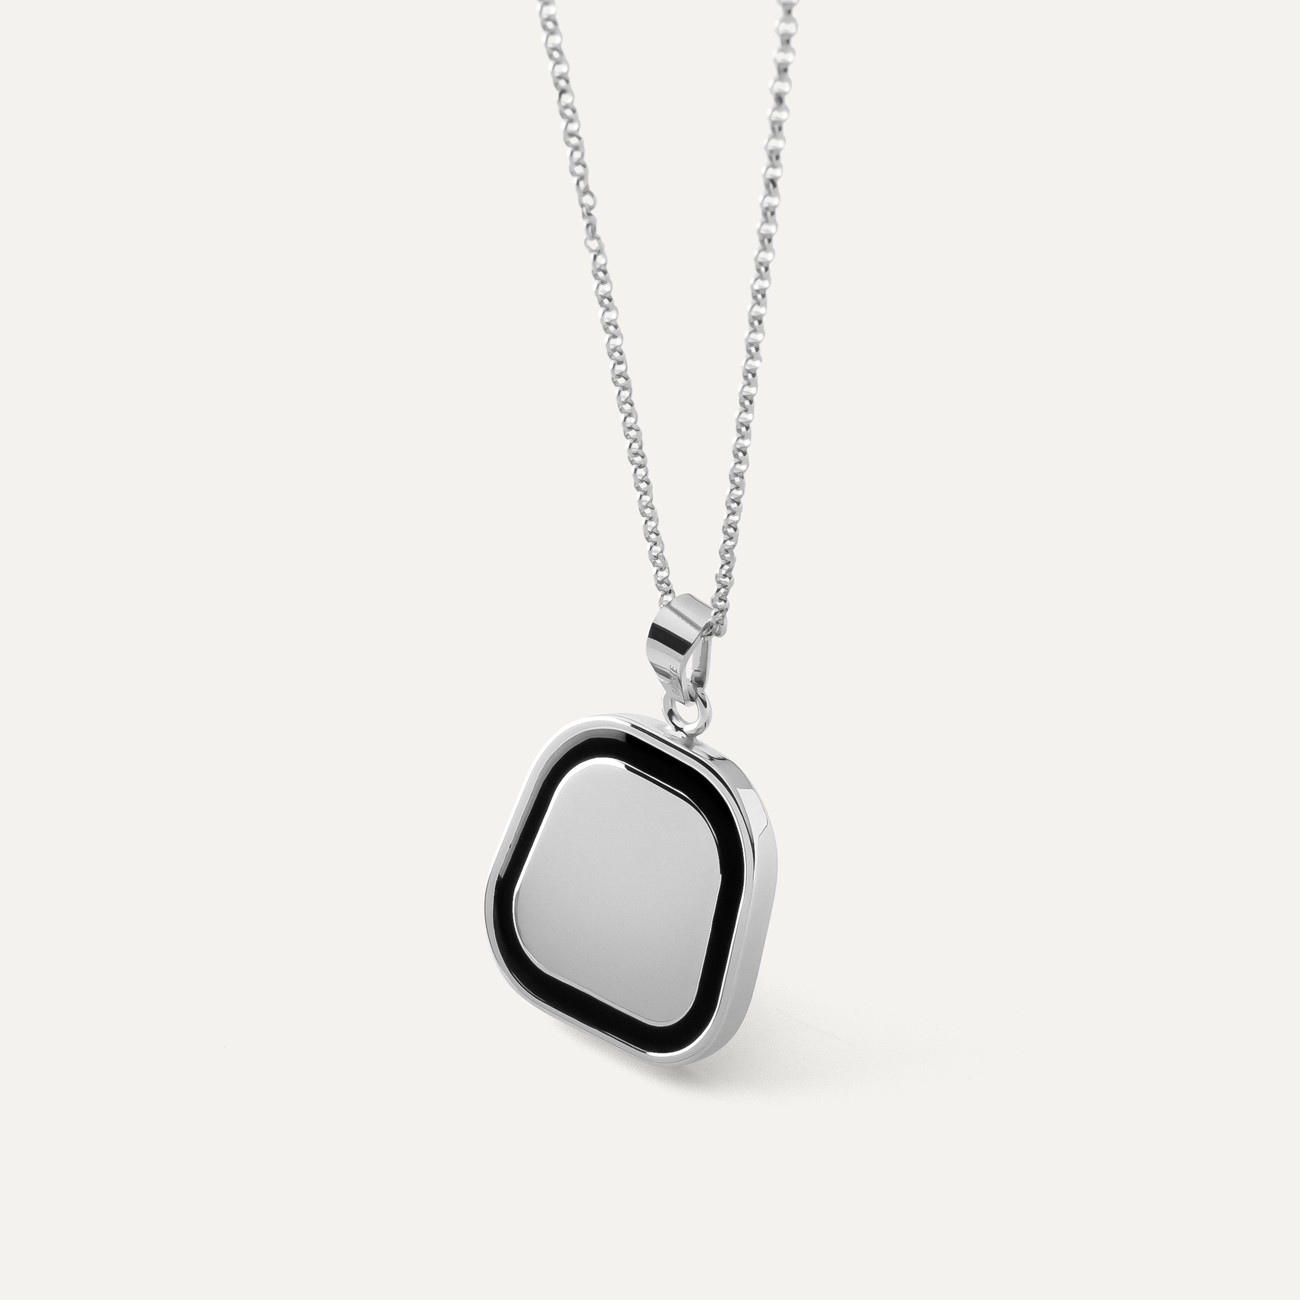 Black resin square necklace, sterling silver 925